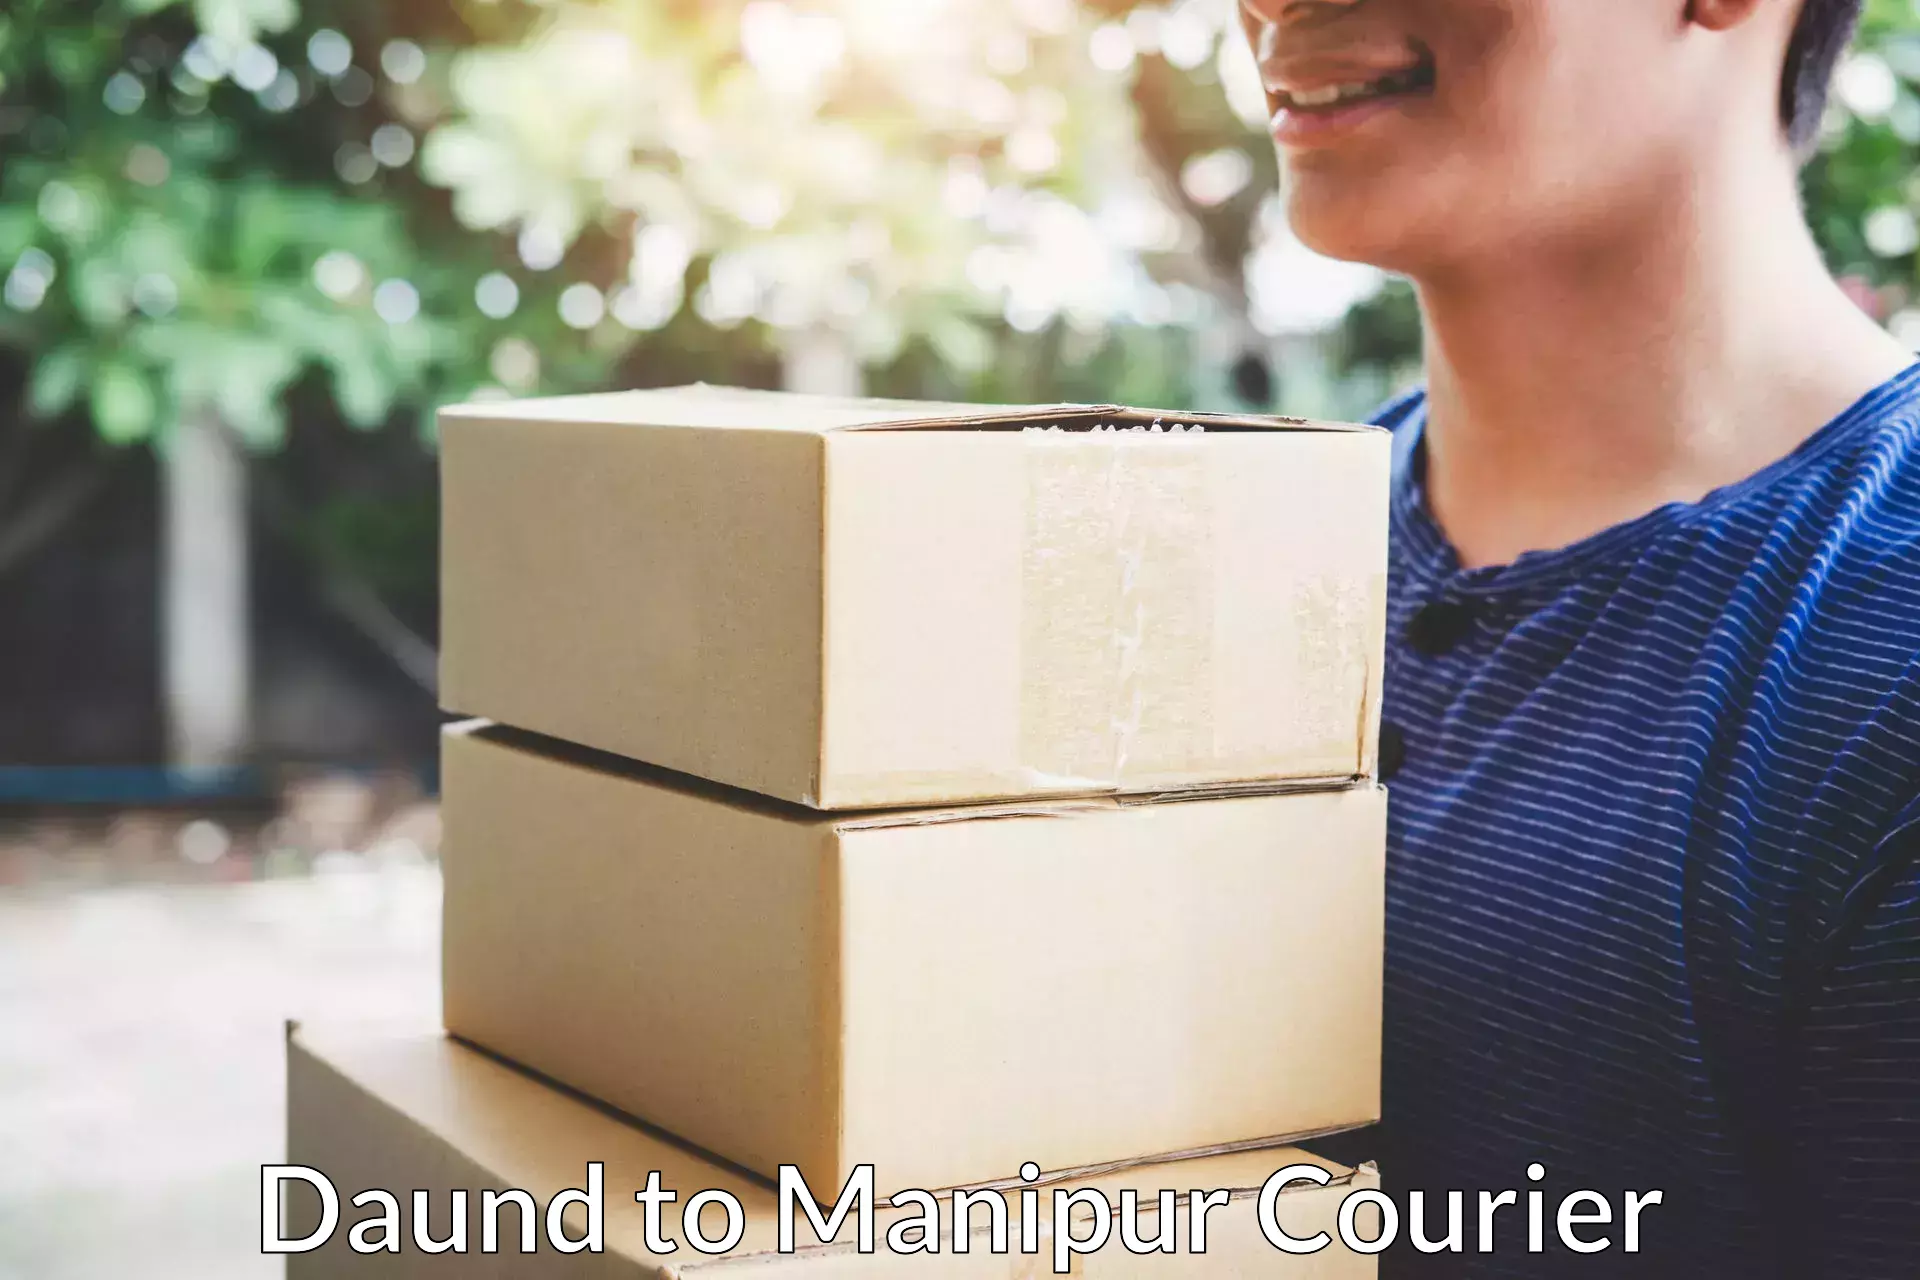 Professional moving company Daund to Manipur